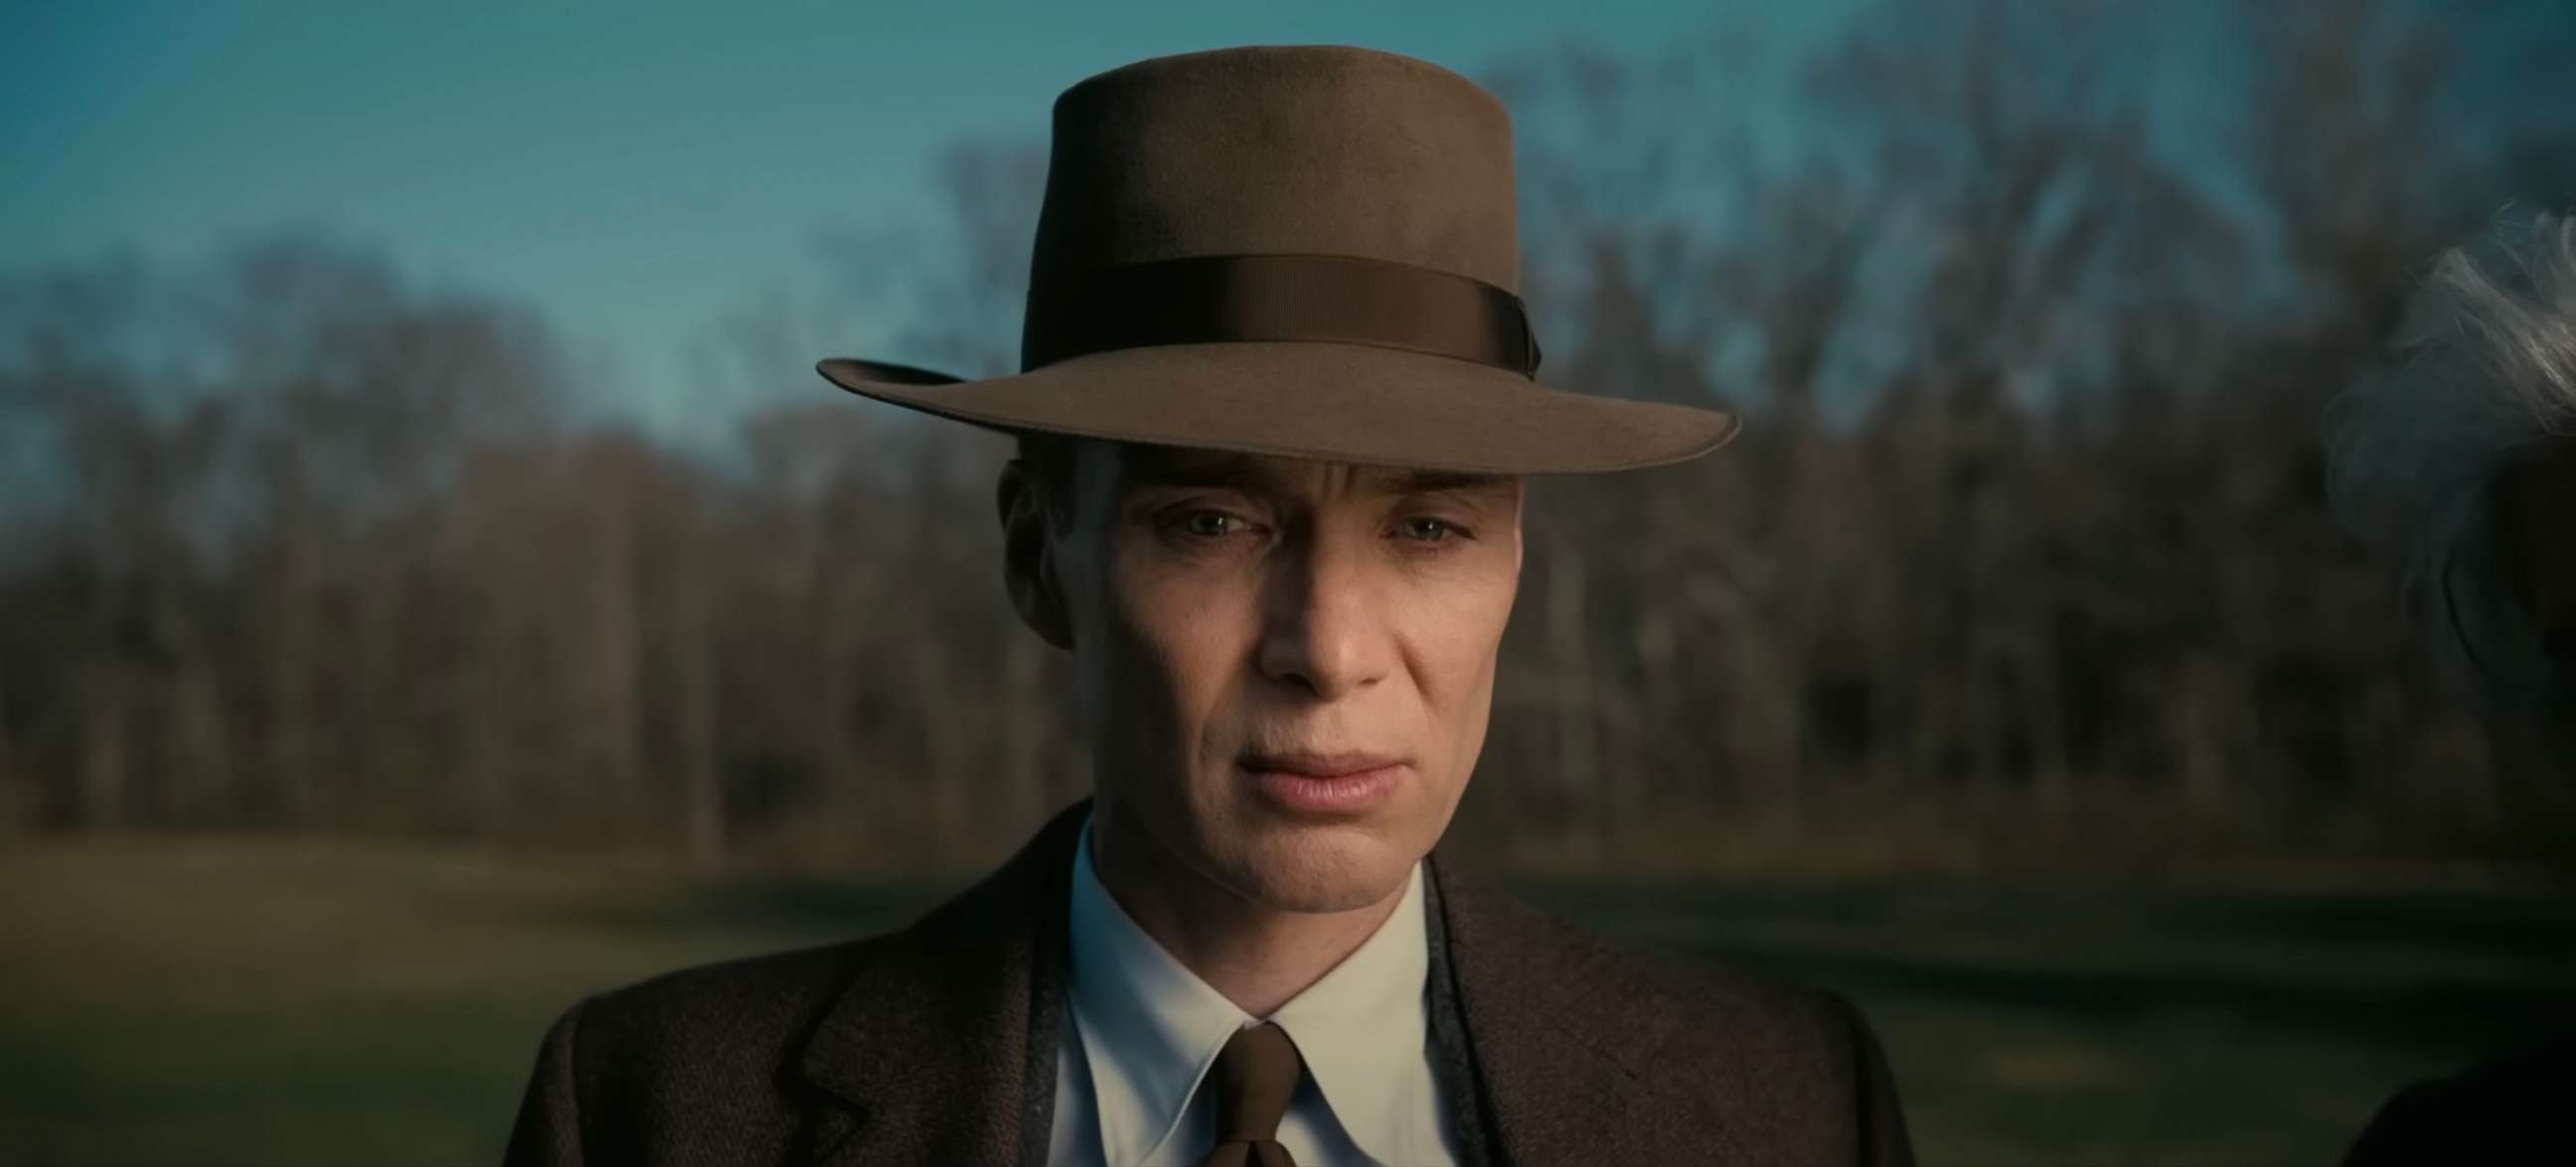 PHOTO: Cillian Murphy is seen in the Universal Pictures move trailer, "Oppenheimer".